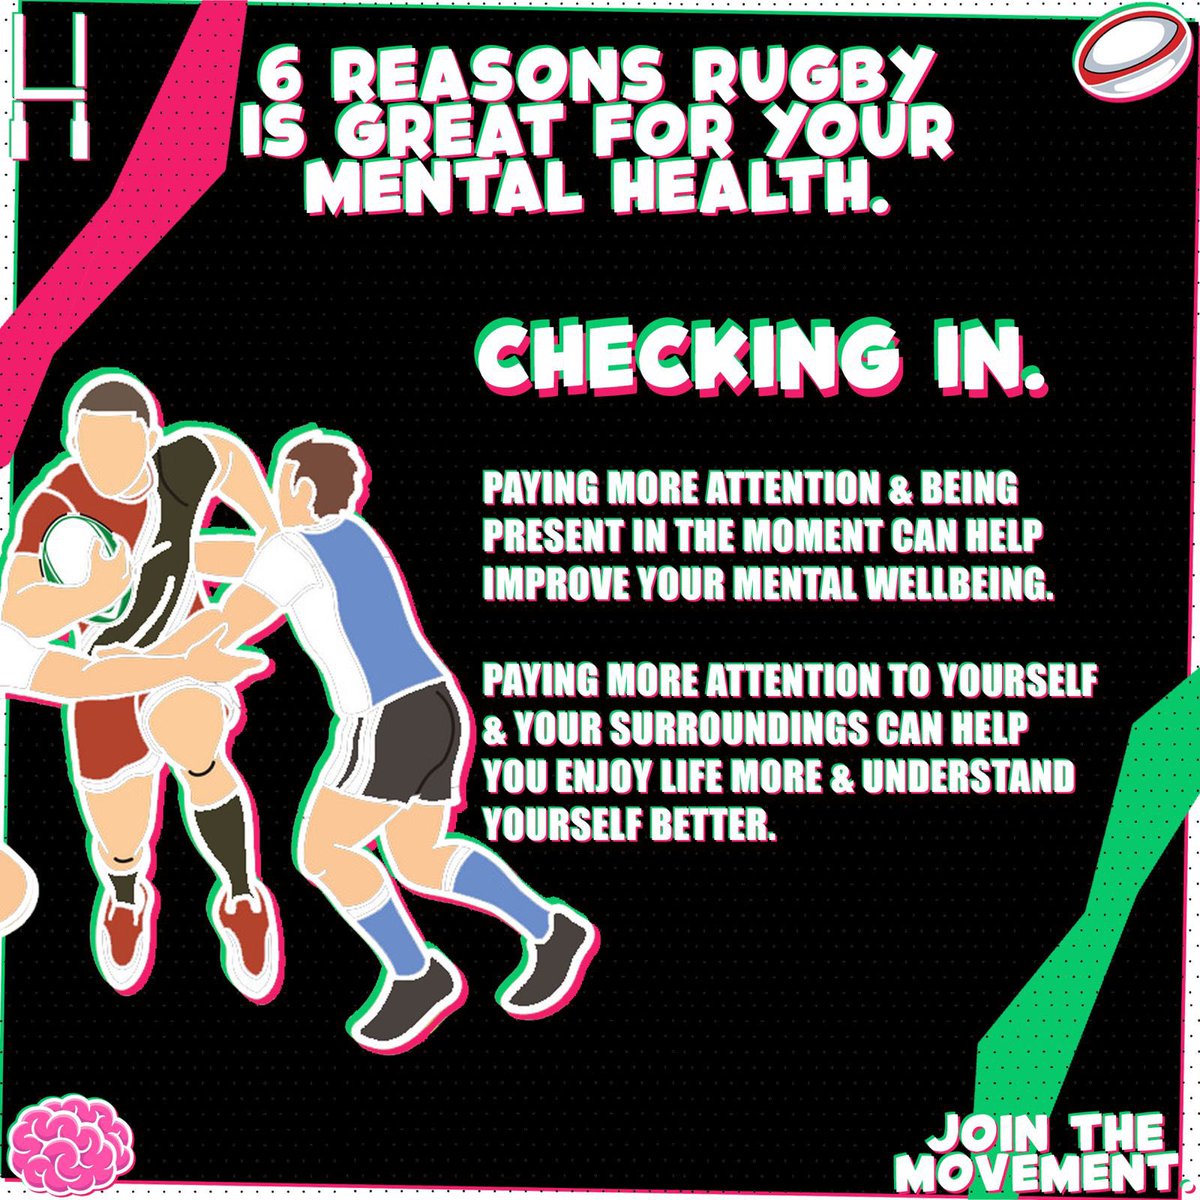 𝗖𝗵𝗲𝗰𝗸𝗶𝗻𝗴 𝗜𝗻 𝗪𝗶𝘁𝗵 𝗬𝗼𝘂𝗿𝘀𝗲𝗹𝗳 & 𝗢𝘁𝗵𝗲𝗿𝘀 💚 Rugby is a great way of checking-in with ourselves & others, whilst helping to stay present in the moment. Check-in before and after training by asking teammates ‘how are you, out of 10?’ #TackleTheStigma 🗣️